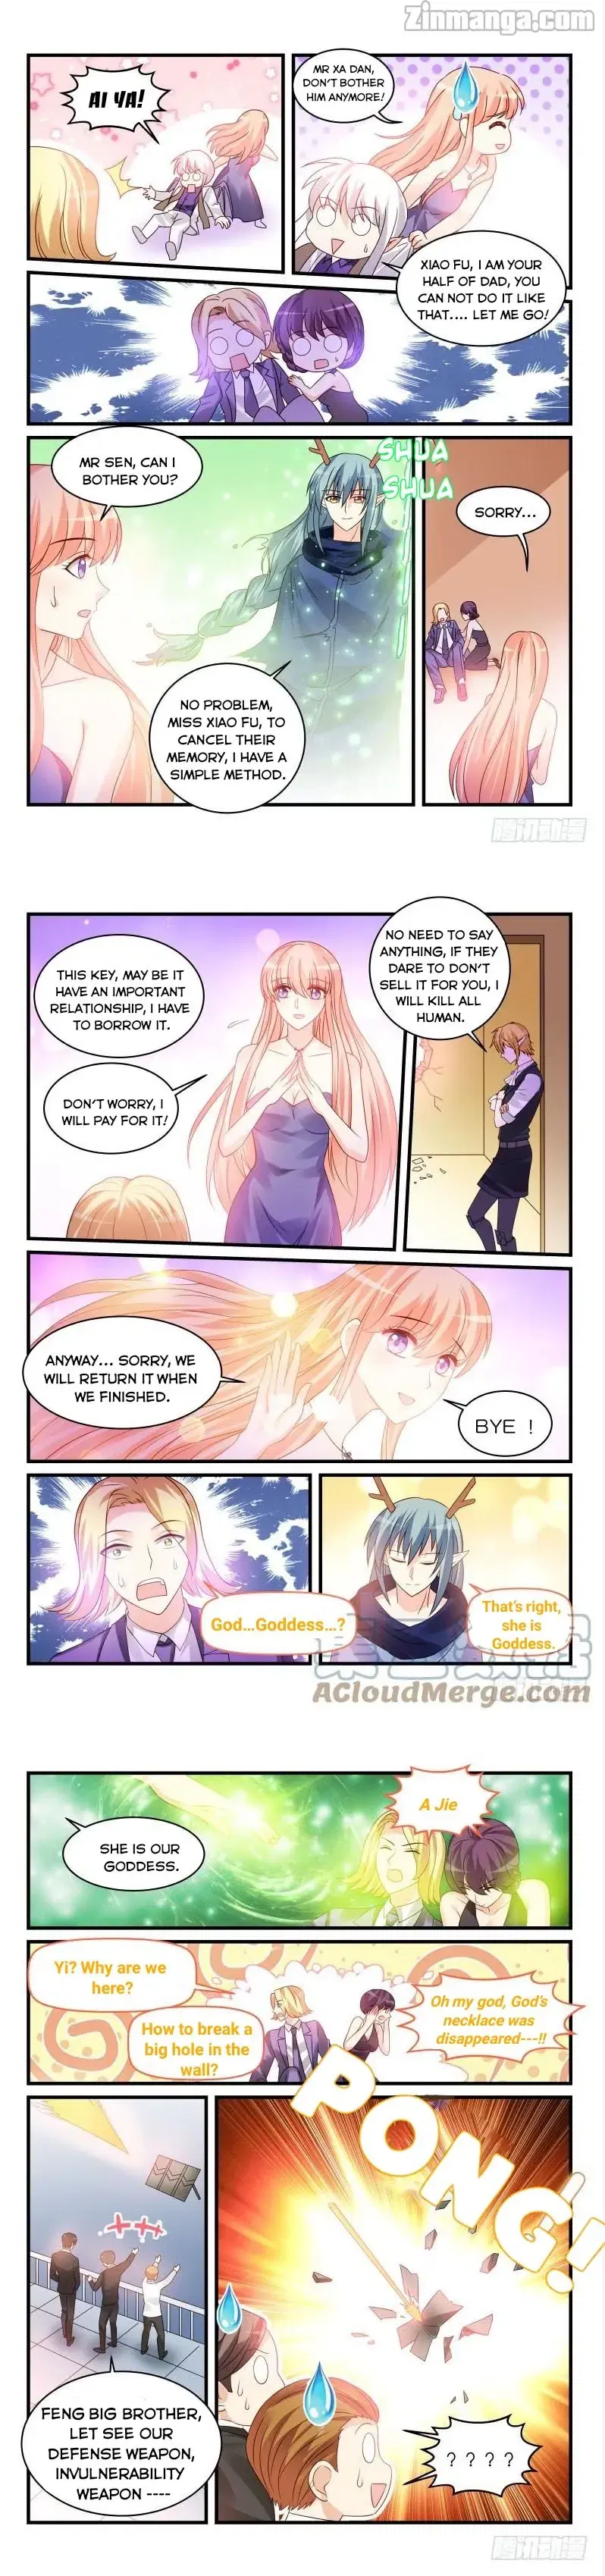 Teach the devil husband Chapter 229 page 3